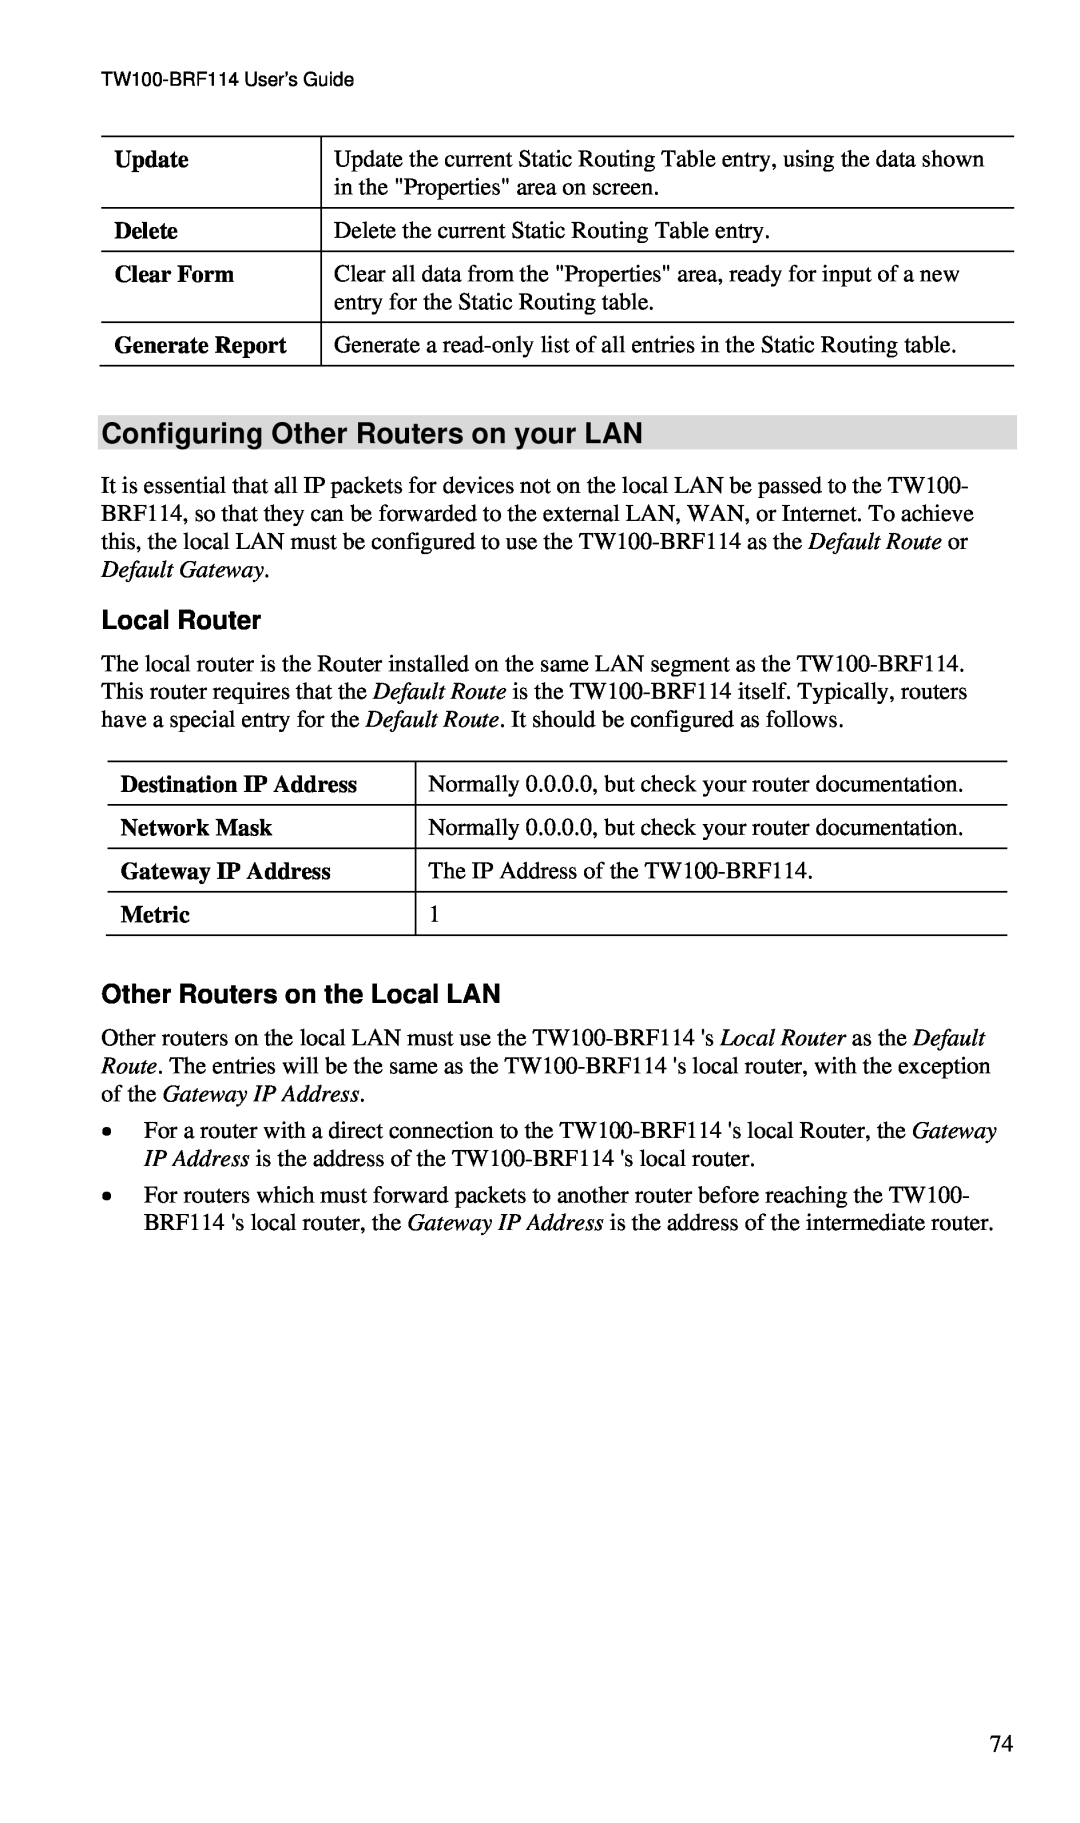 TRENDnet BRF114 Configuring Other Routers on your LAN, Update, Delete, Clear Form, Generate Report, Destination IP Address 